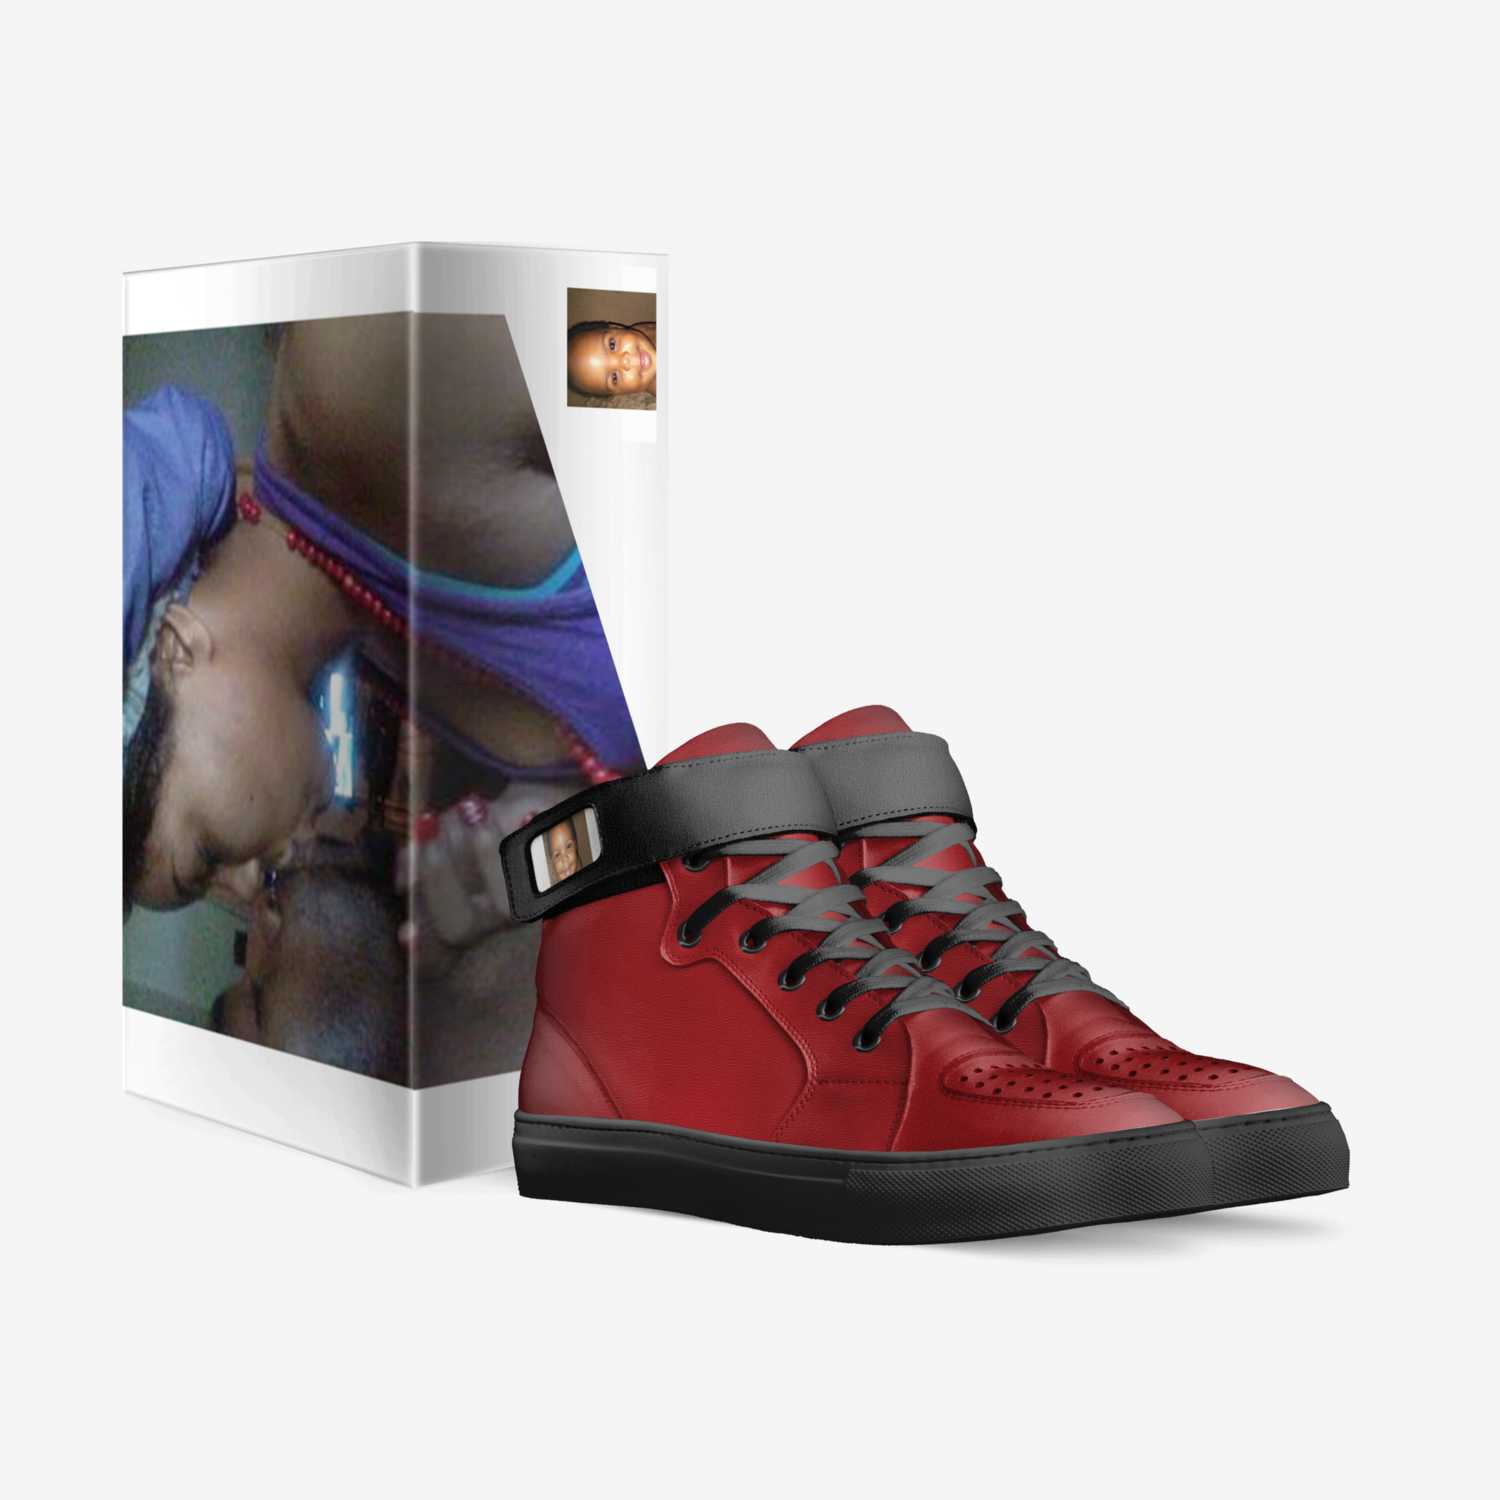 Jmac88 custom made in Italy shoes by Stanovyah Sloan | Box view